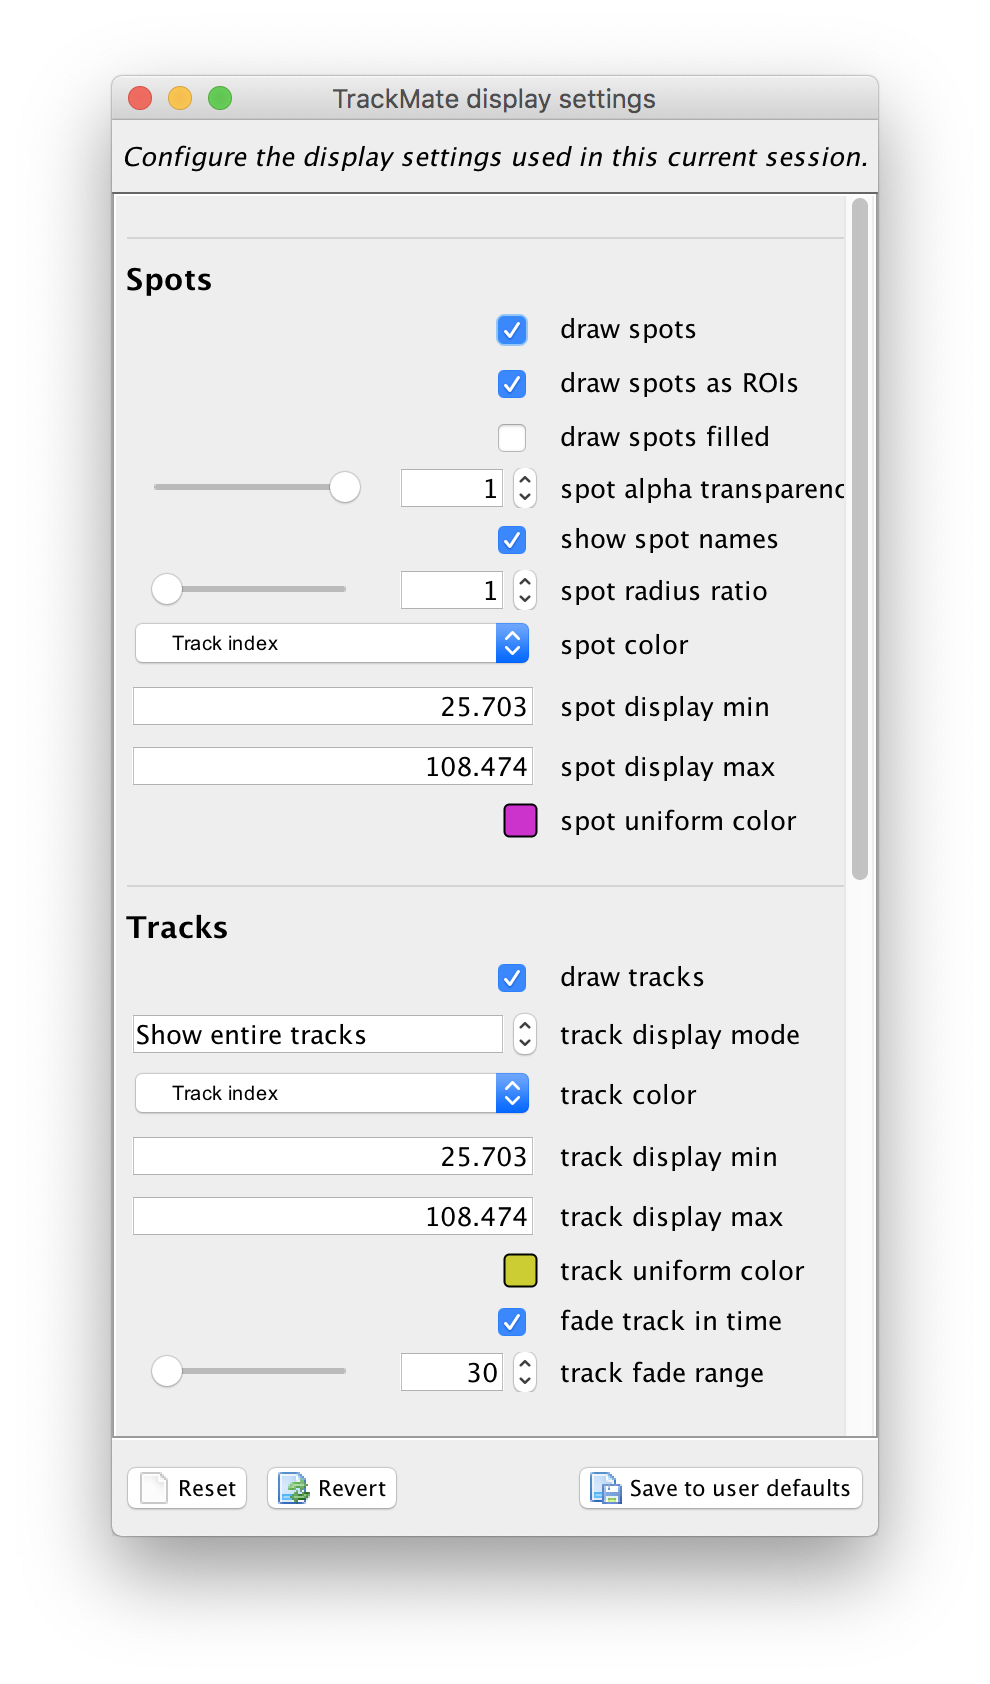 trackmate-display-settings-2.png